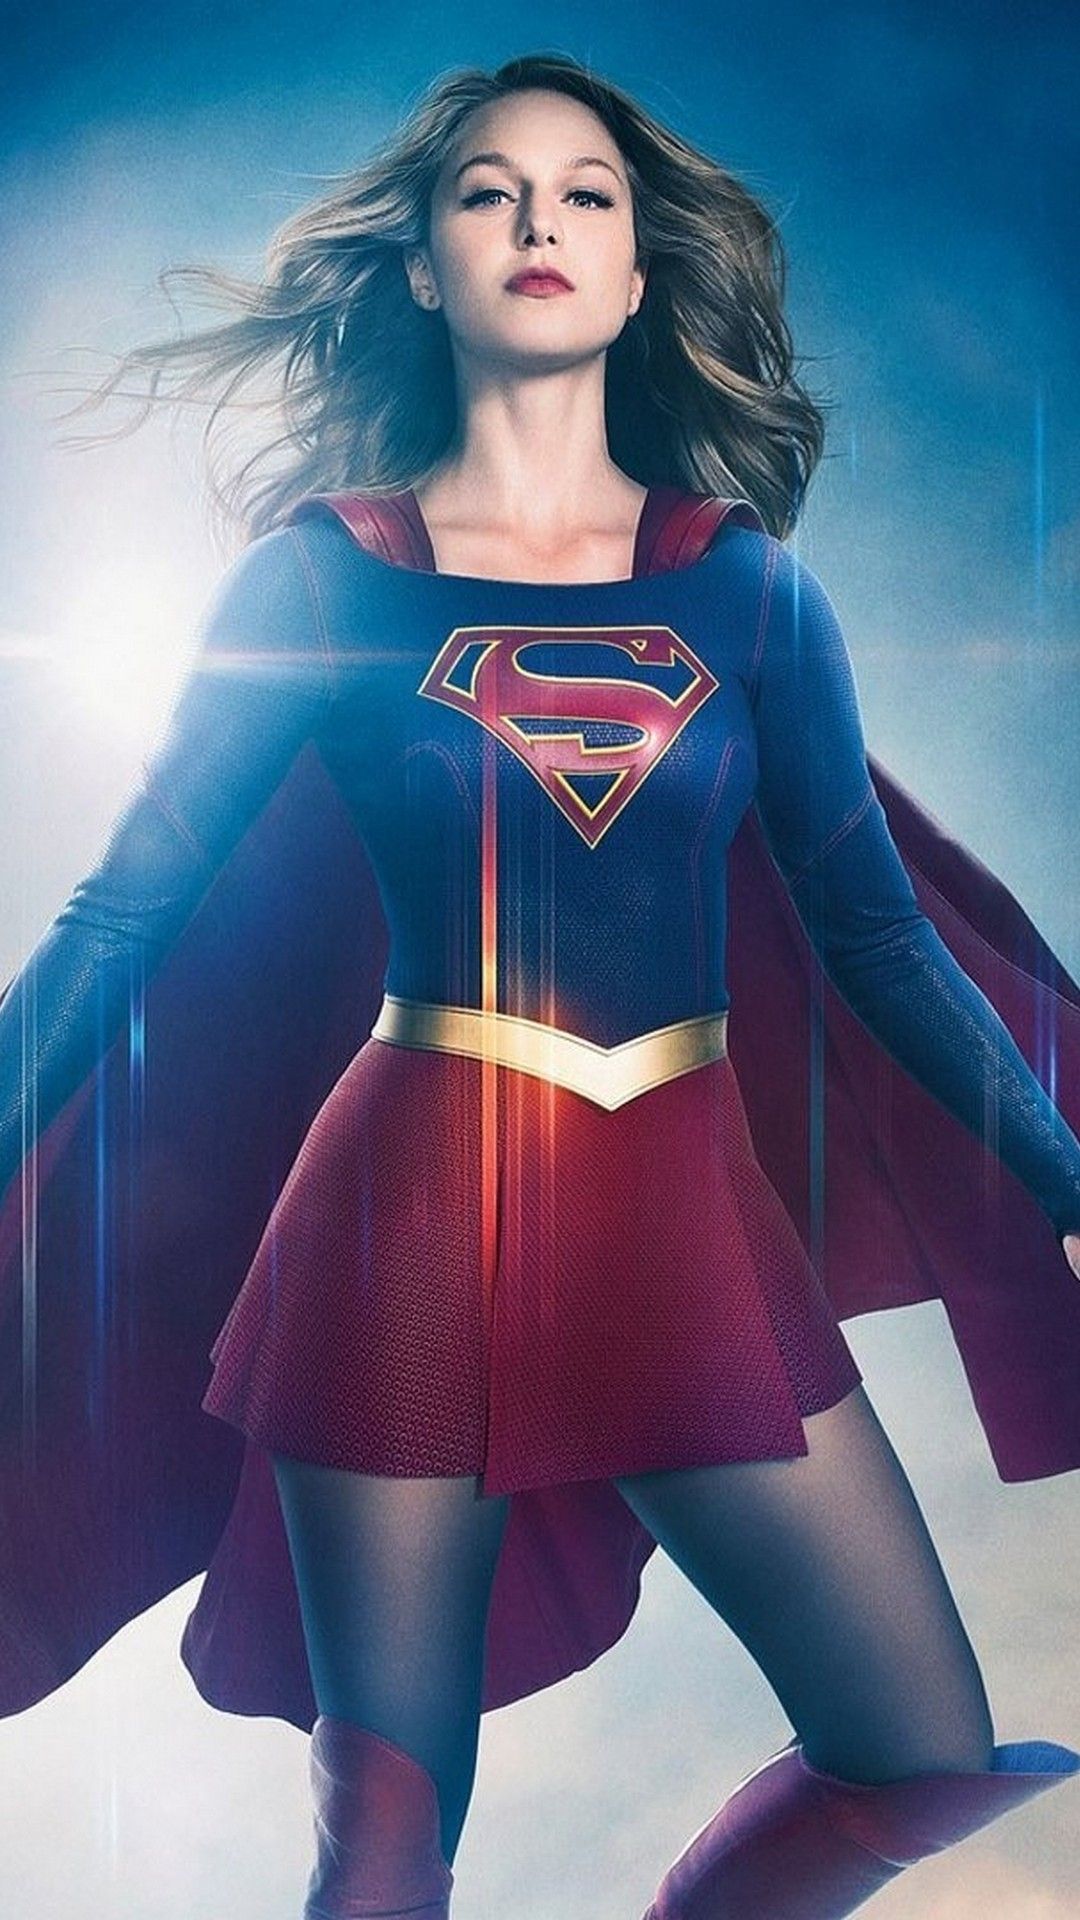 Supergirl Wallpaper Best Wallpapers Android Superman - vrogue.co